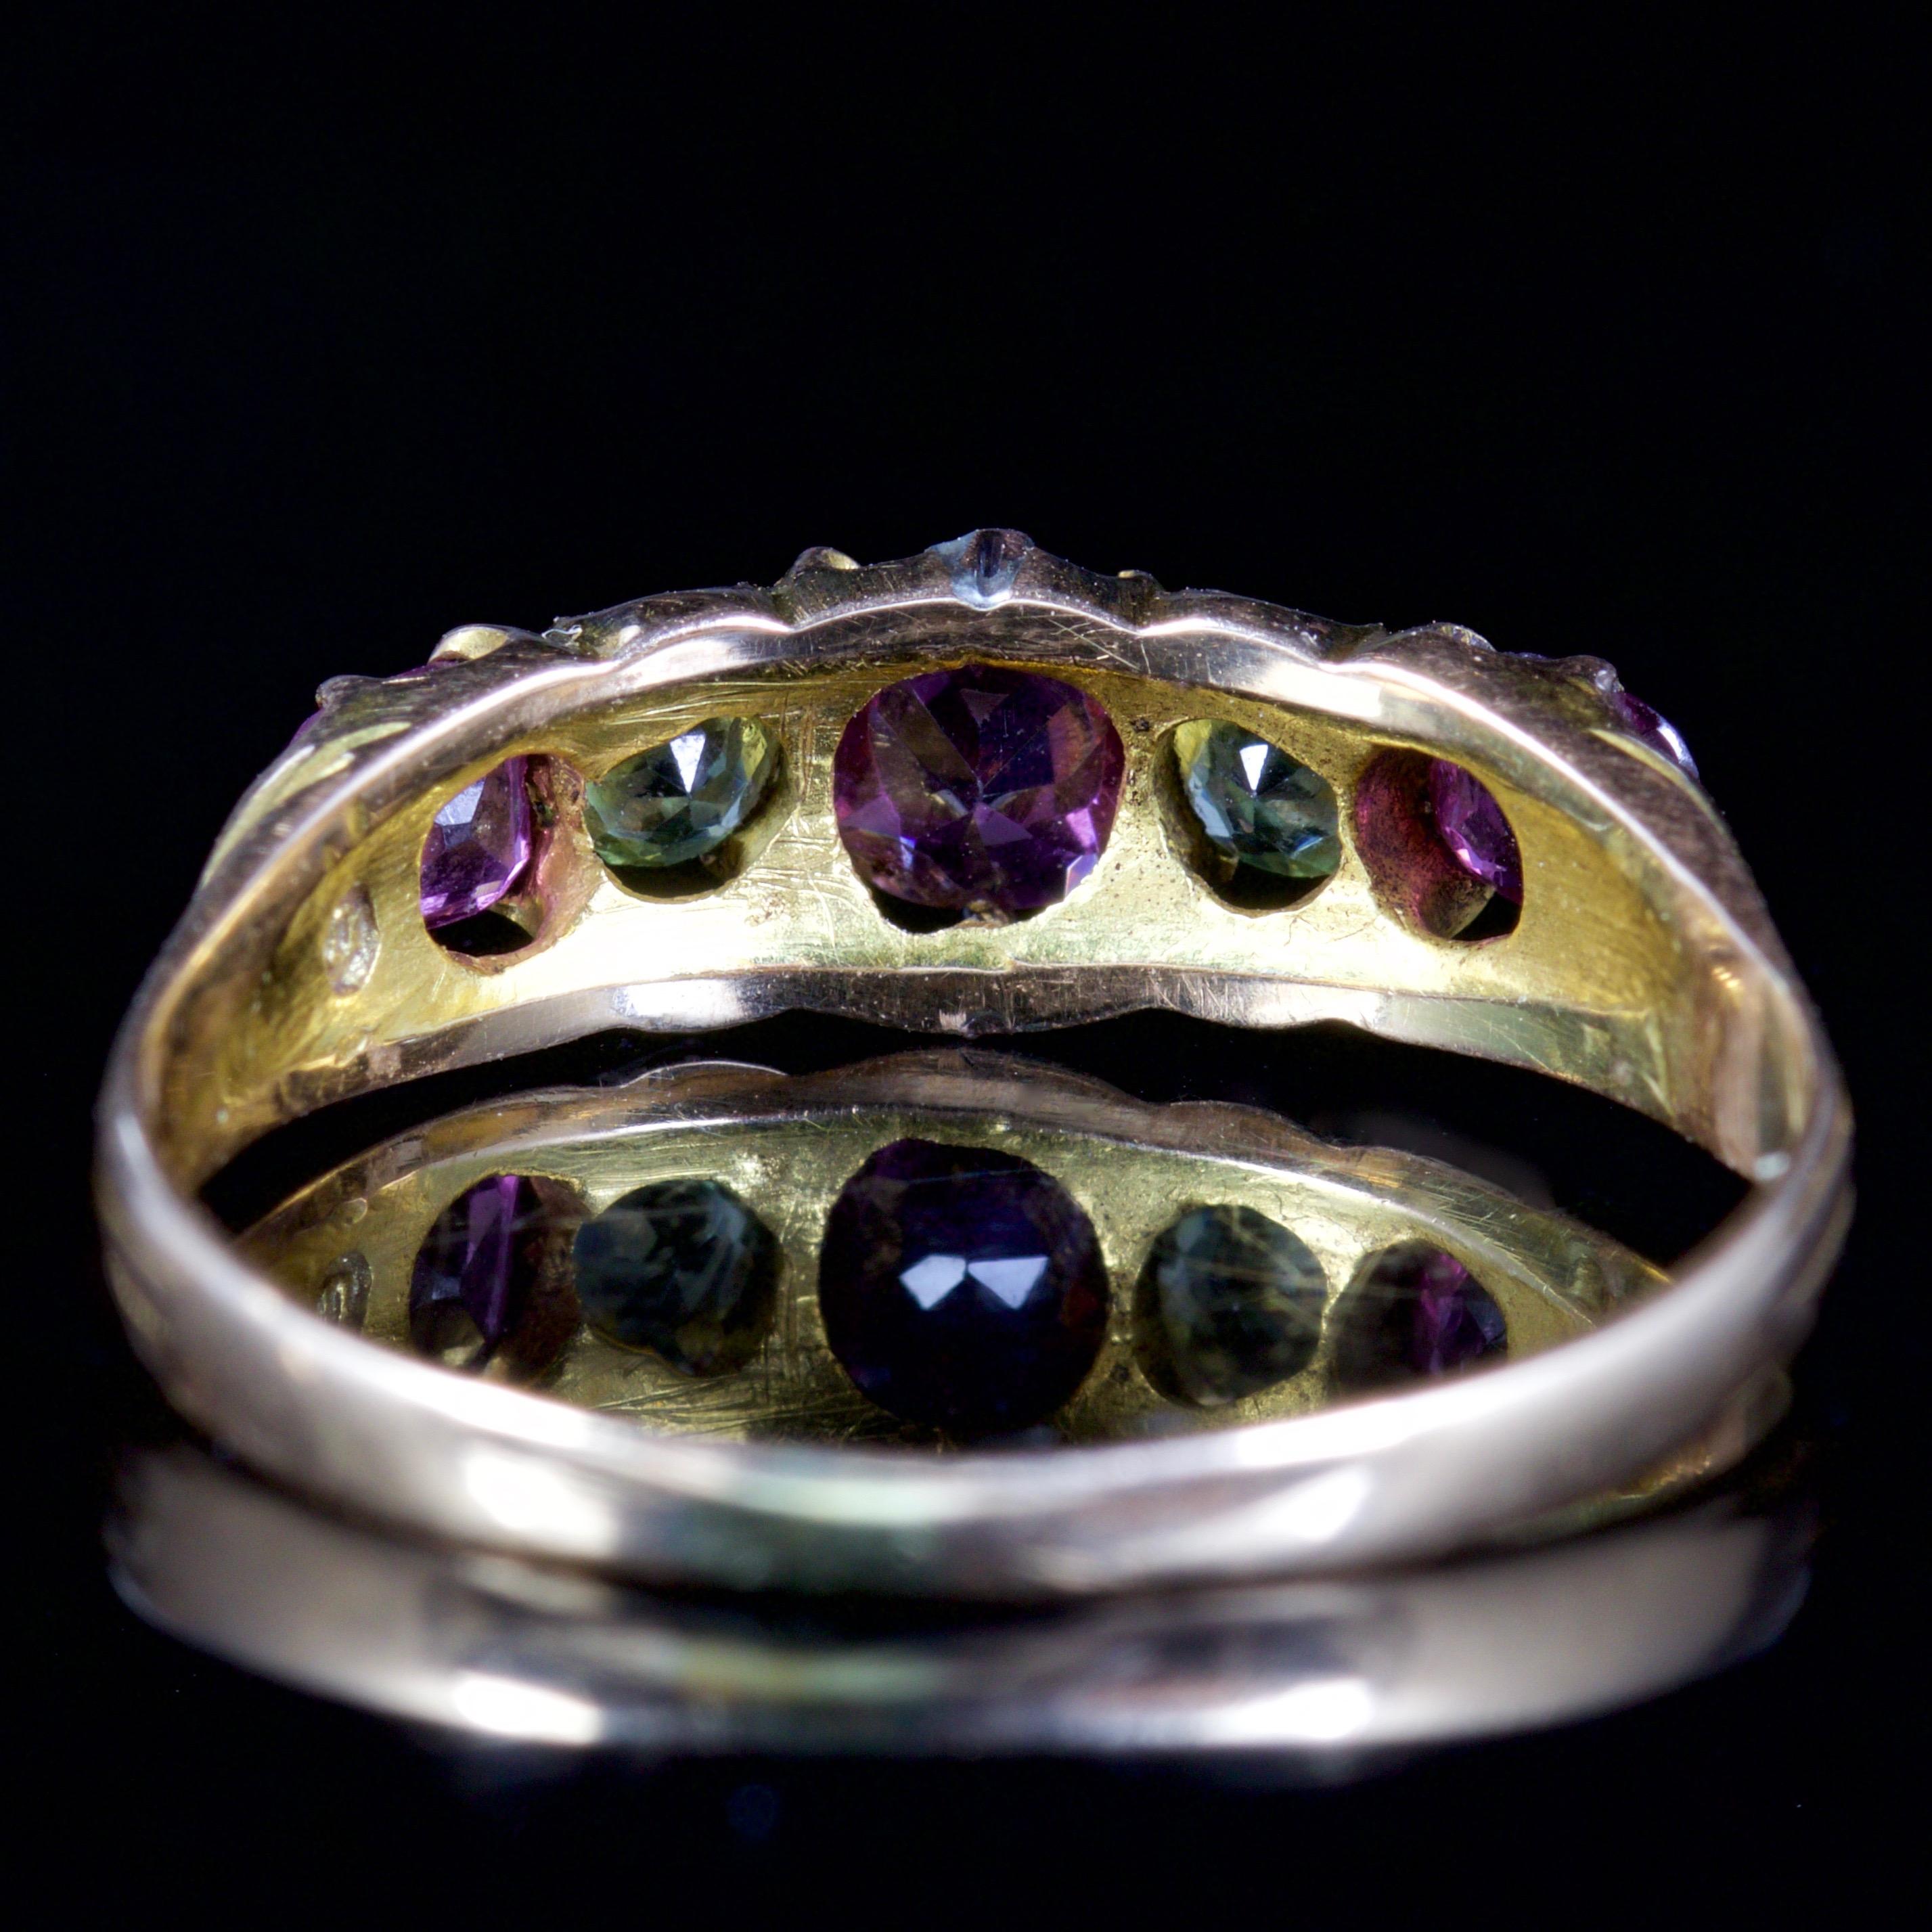 Antique Victorian Suffragette Amethyst Peridot Ring 15 Carat Gold, circa 1900 In Excellent Condition For Sale In Lancaster, Lancashire